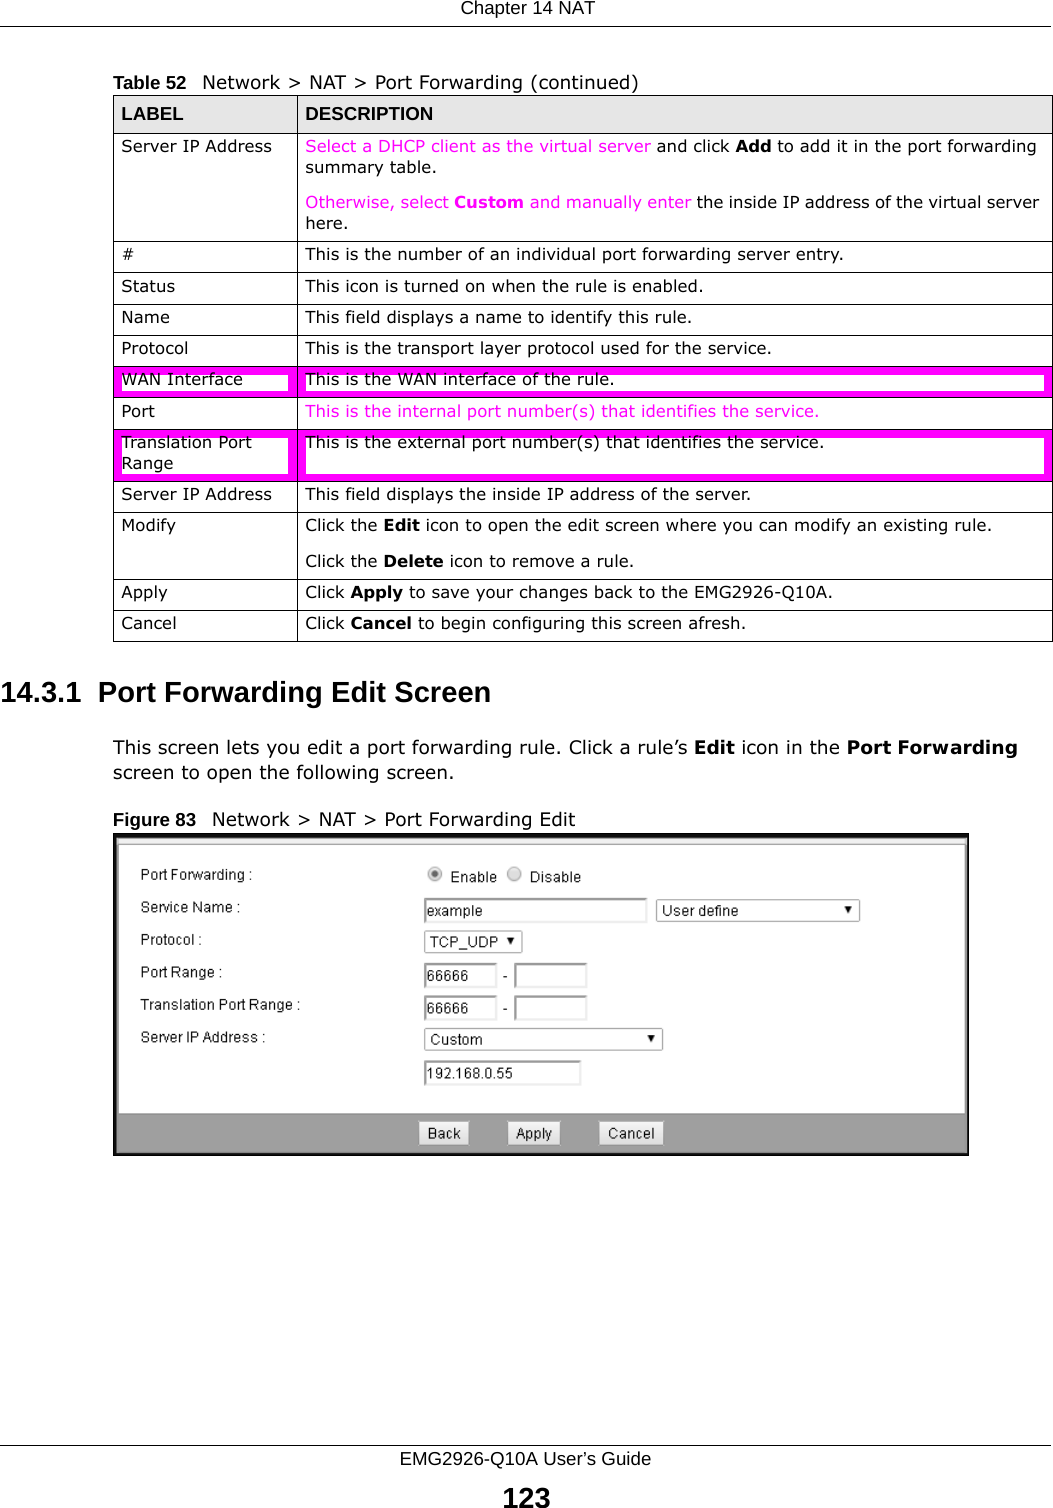  Chapter 14 NATEMG2926-Q10A User’s Guide12314.3.1  Port Forwarding Edit Screen This screen lets you edit a port forwarding rule. Click a rule’s Edit icon in the Port Forwarding screen to open the following screen.Figure 83   Network &gt; NAT &gt; Port Forwarding Edit Server IP Address Select a DHCP client as the virtual server and click Add to add it in the port forwarding summary table.Otherwise, select Custom and manually enter the inside IP address of the virtual server here.#This is the number of an individual port forwarding server entry.Status This icon is turned on when the rule is enabled. Name This field displays a name to identify this rule.Protocol This is the transport layer protocol used for the service.WAN Interface This is the WAN interface of the rule.Port This is the internal port number(s) that identifies the service.Translation Port RangeThis is the external port number(s) that identifies the service.Server IP Address This field displays the inside IP address of the server.Modify Click the Edit icon to open the edit screen where you can modify an existing rule. Click the Delete icon to remove a rule.Apply Click Apply to save your changes back to the EMG2926-Q10A.Cancel Click Cancel to begin configuring this screen afresh.Table 52   Network &gt; NAT &gt; Port Forwarding (continued)LABEL DESCRIPTION